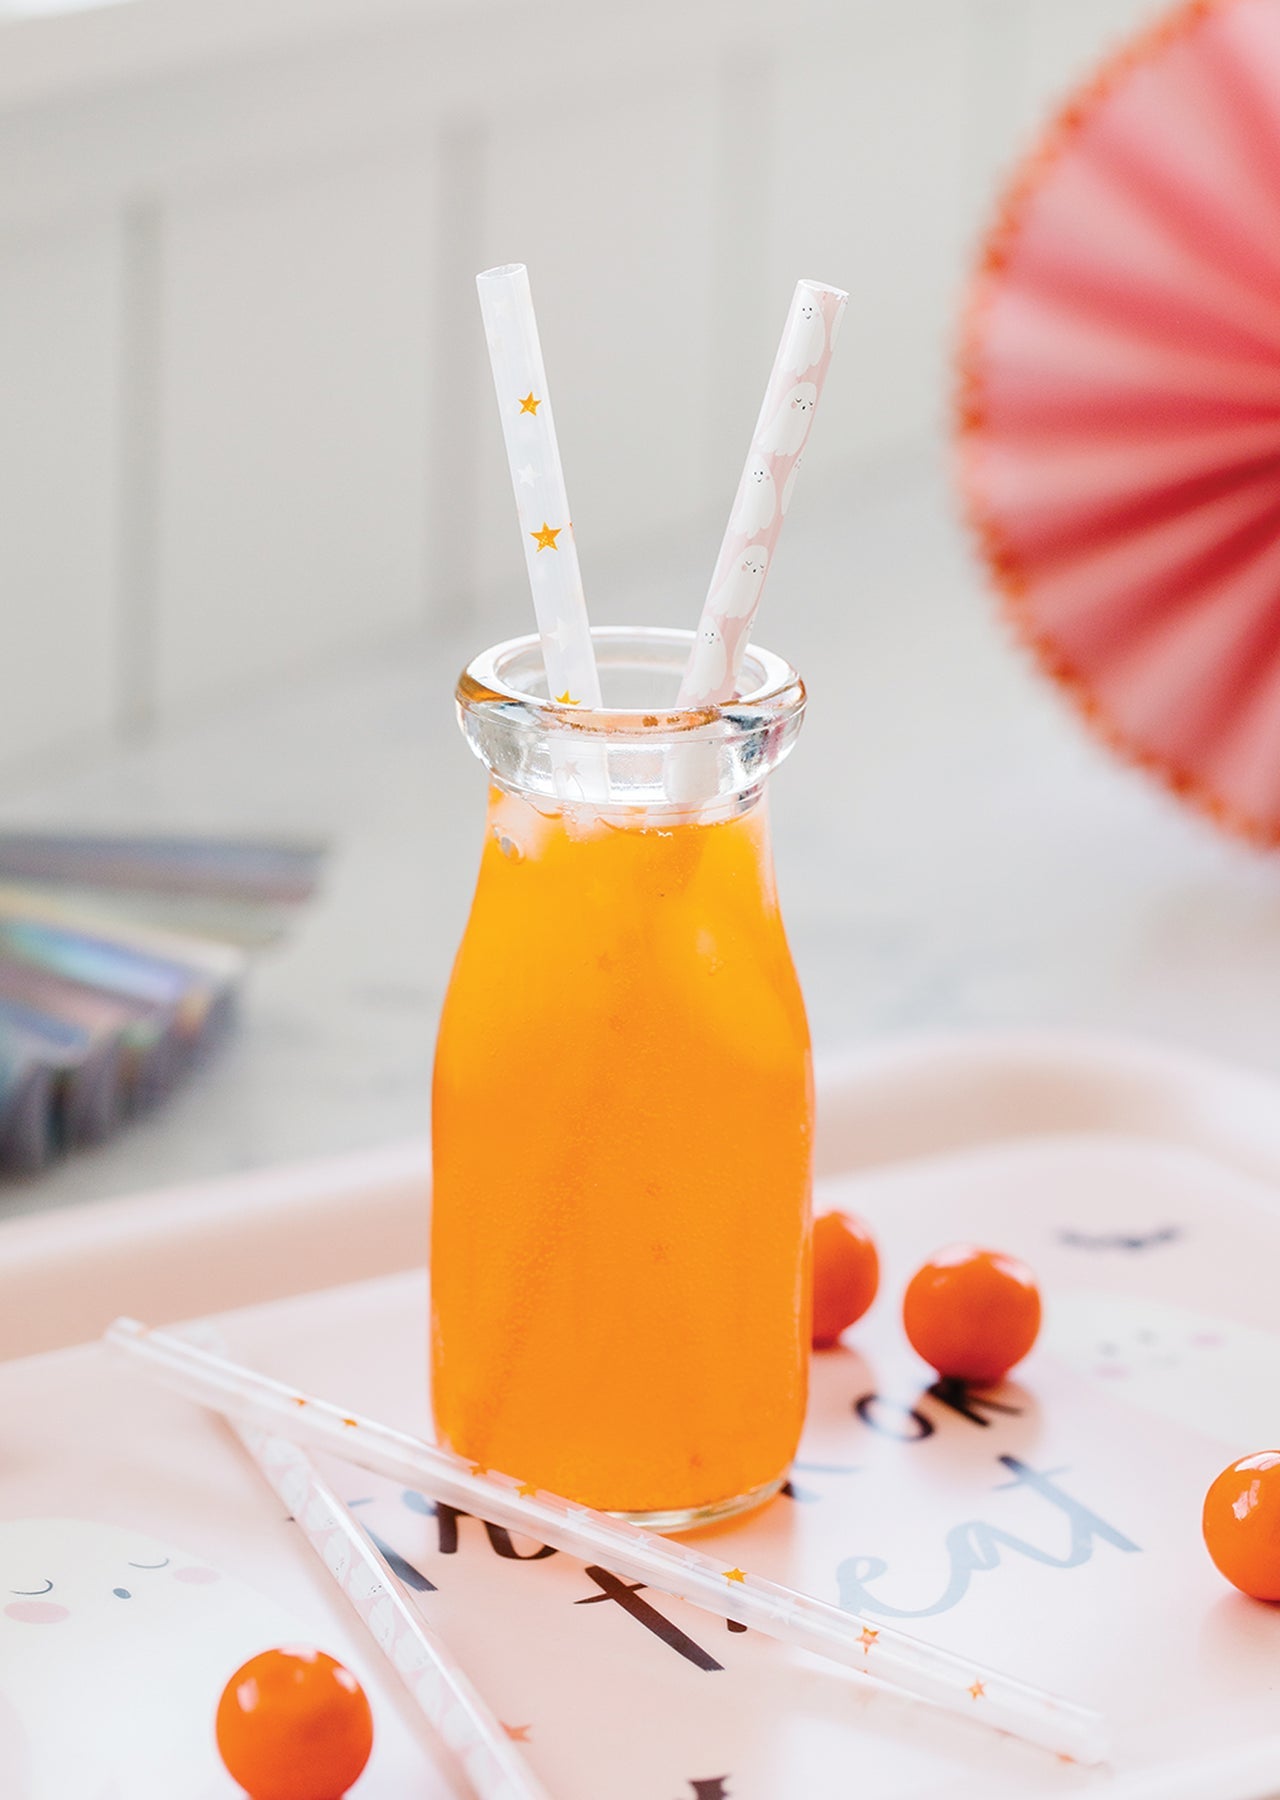 GHOSTS AND STARS REUSABLE STRAWS